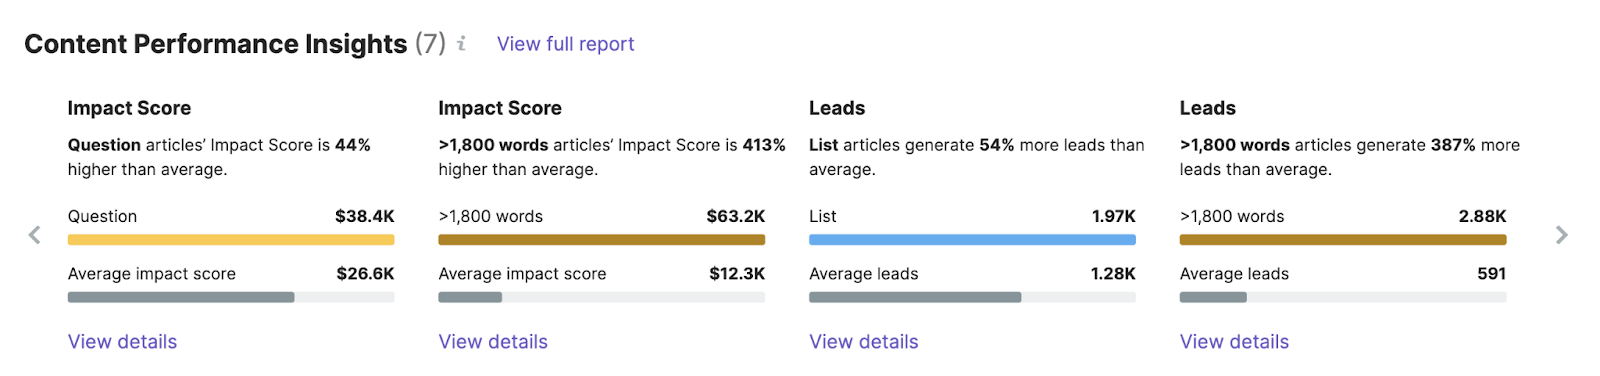 Content Performance Insights